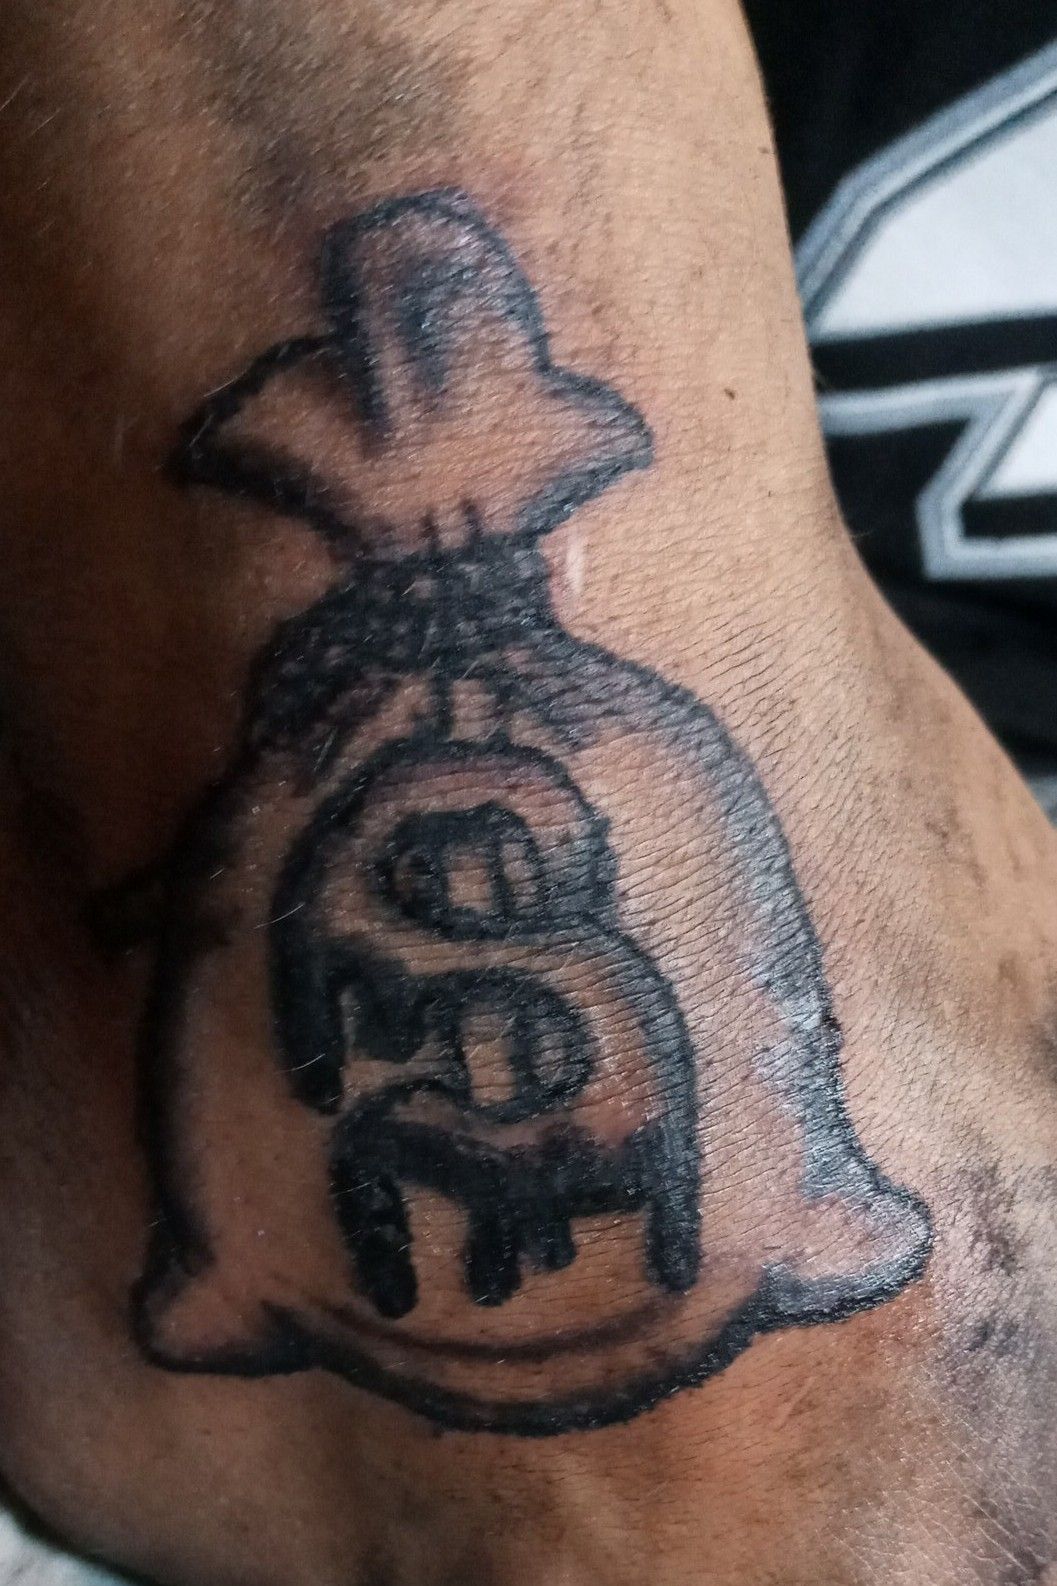 Money Bag Tattoos Wealth Ambition and Artistry  Art and Design